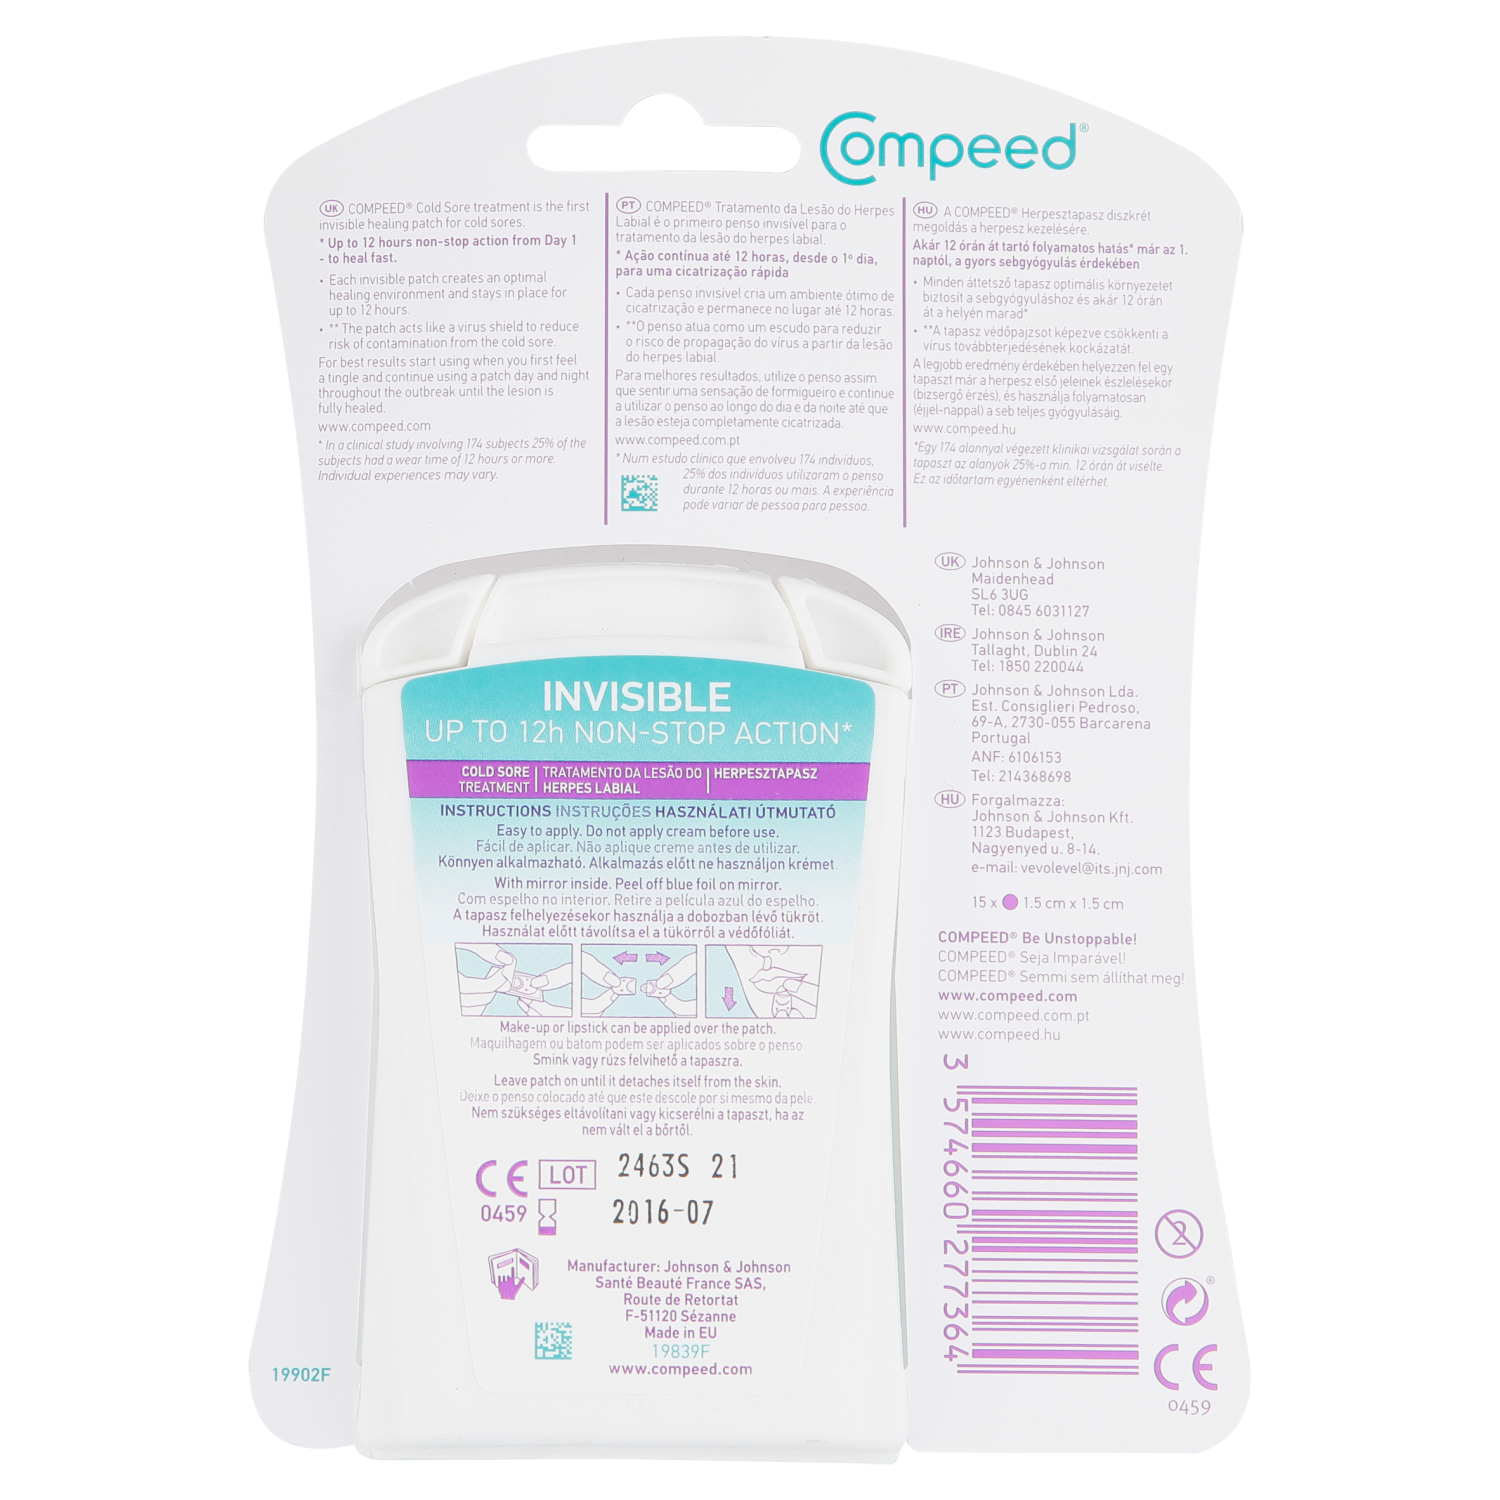 Compeed Cold Sore Patches (15)